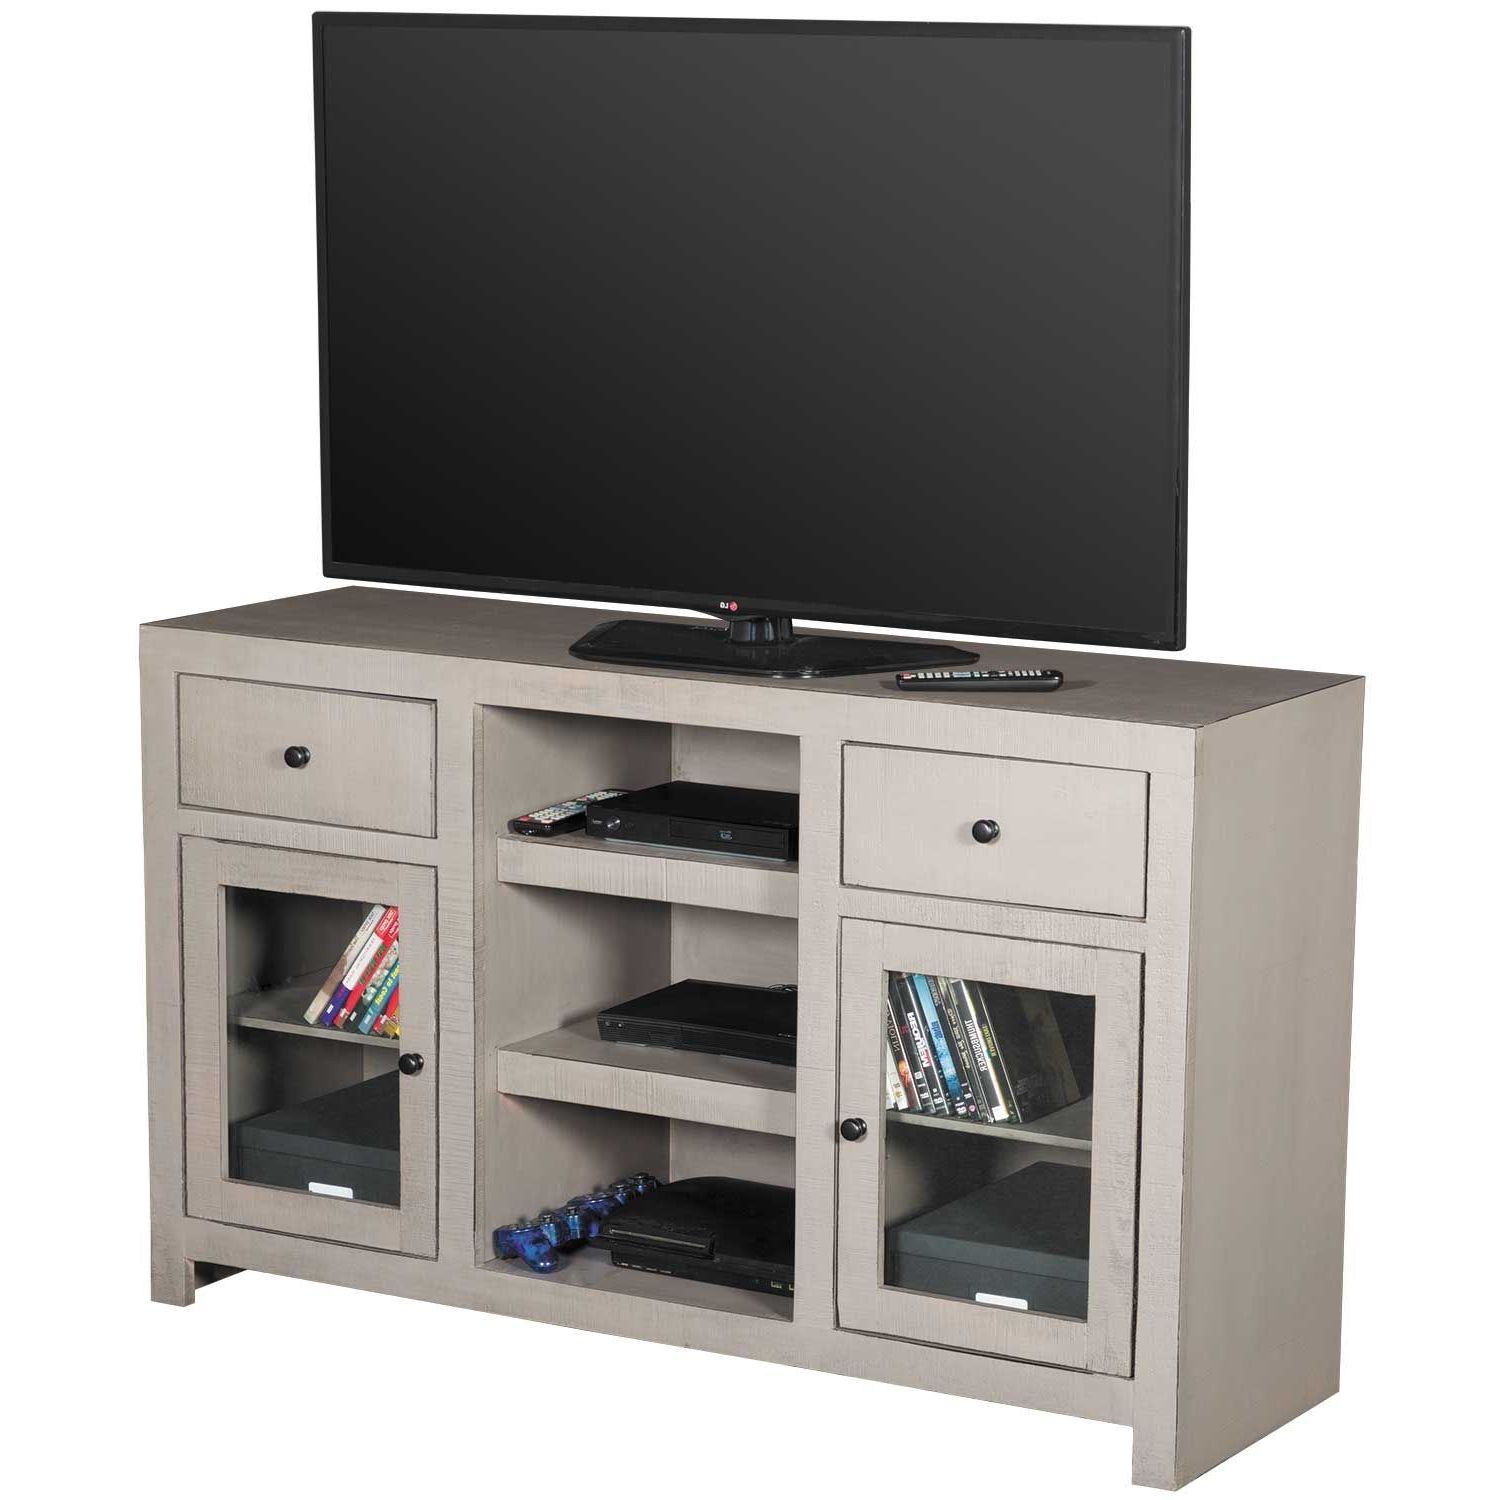 Tv Stand Canyon 52" Dark Brown – Meximuebles Furniture Factory With Canyon Oak Tv Stands (Gallery 20 of 20)